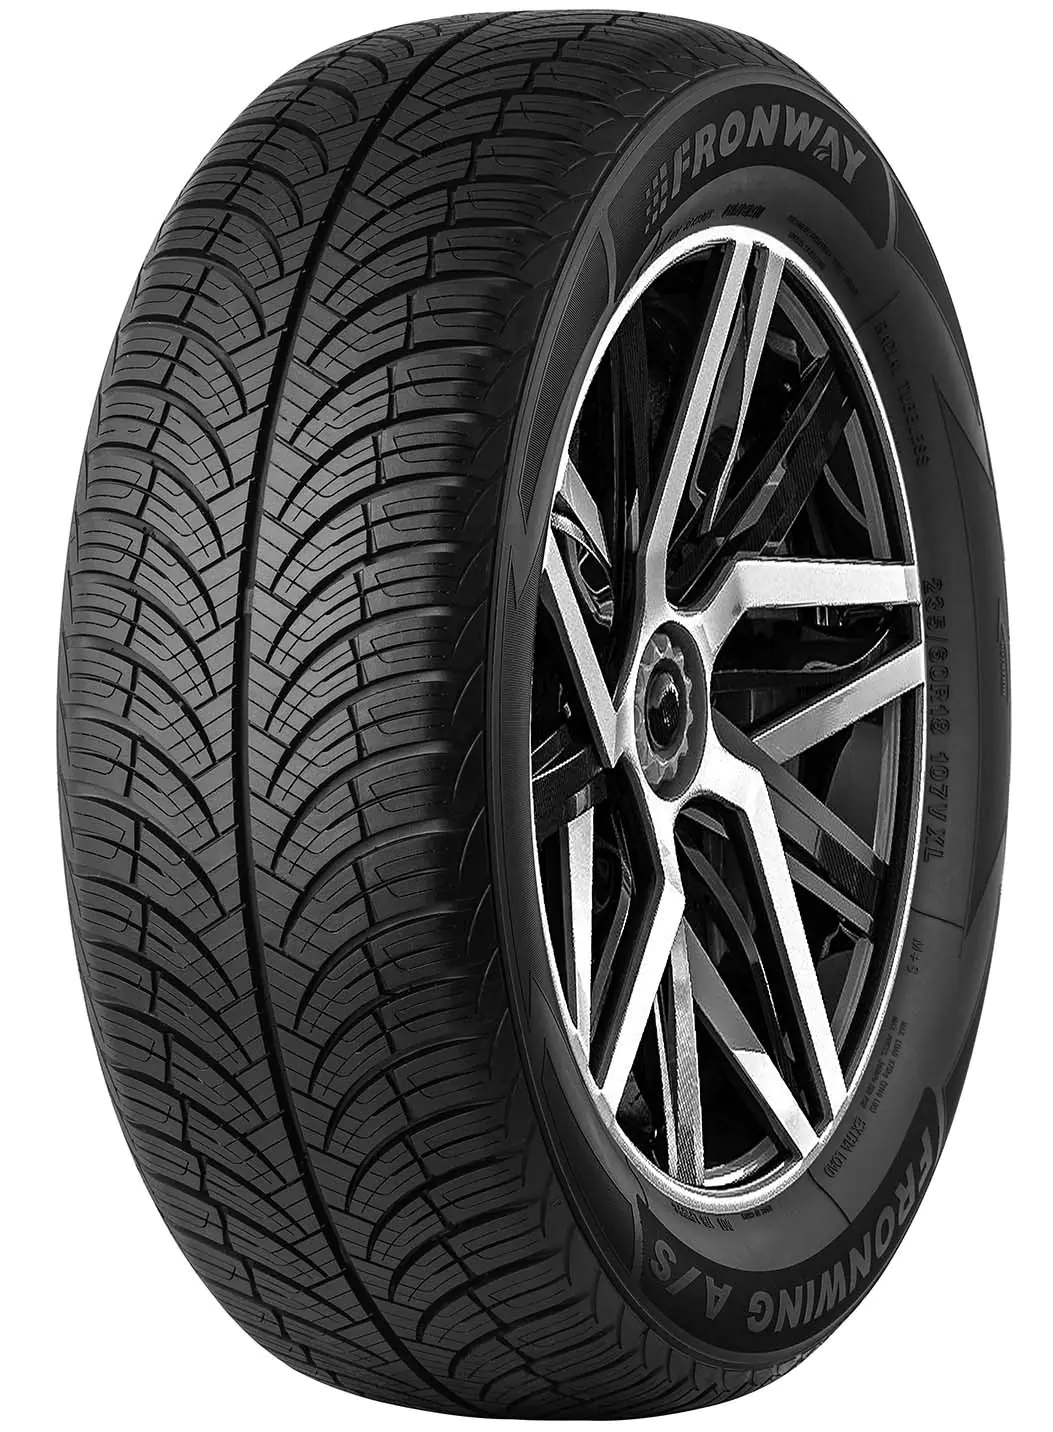 Fronway Fronway 215/65 R17 99T FRONWING A/S pneumatici nuovi All Season 